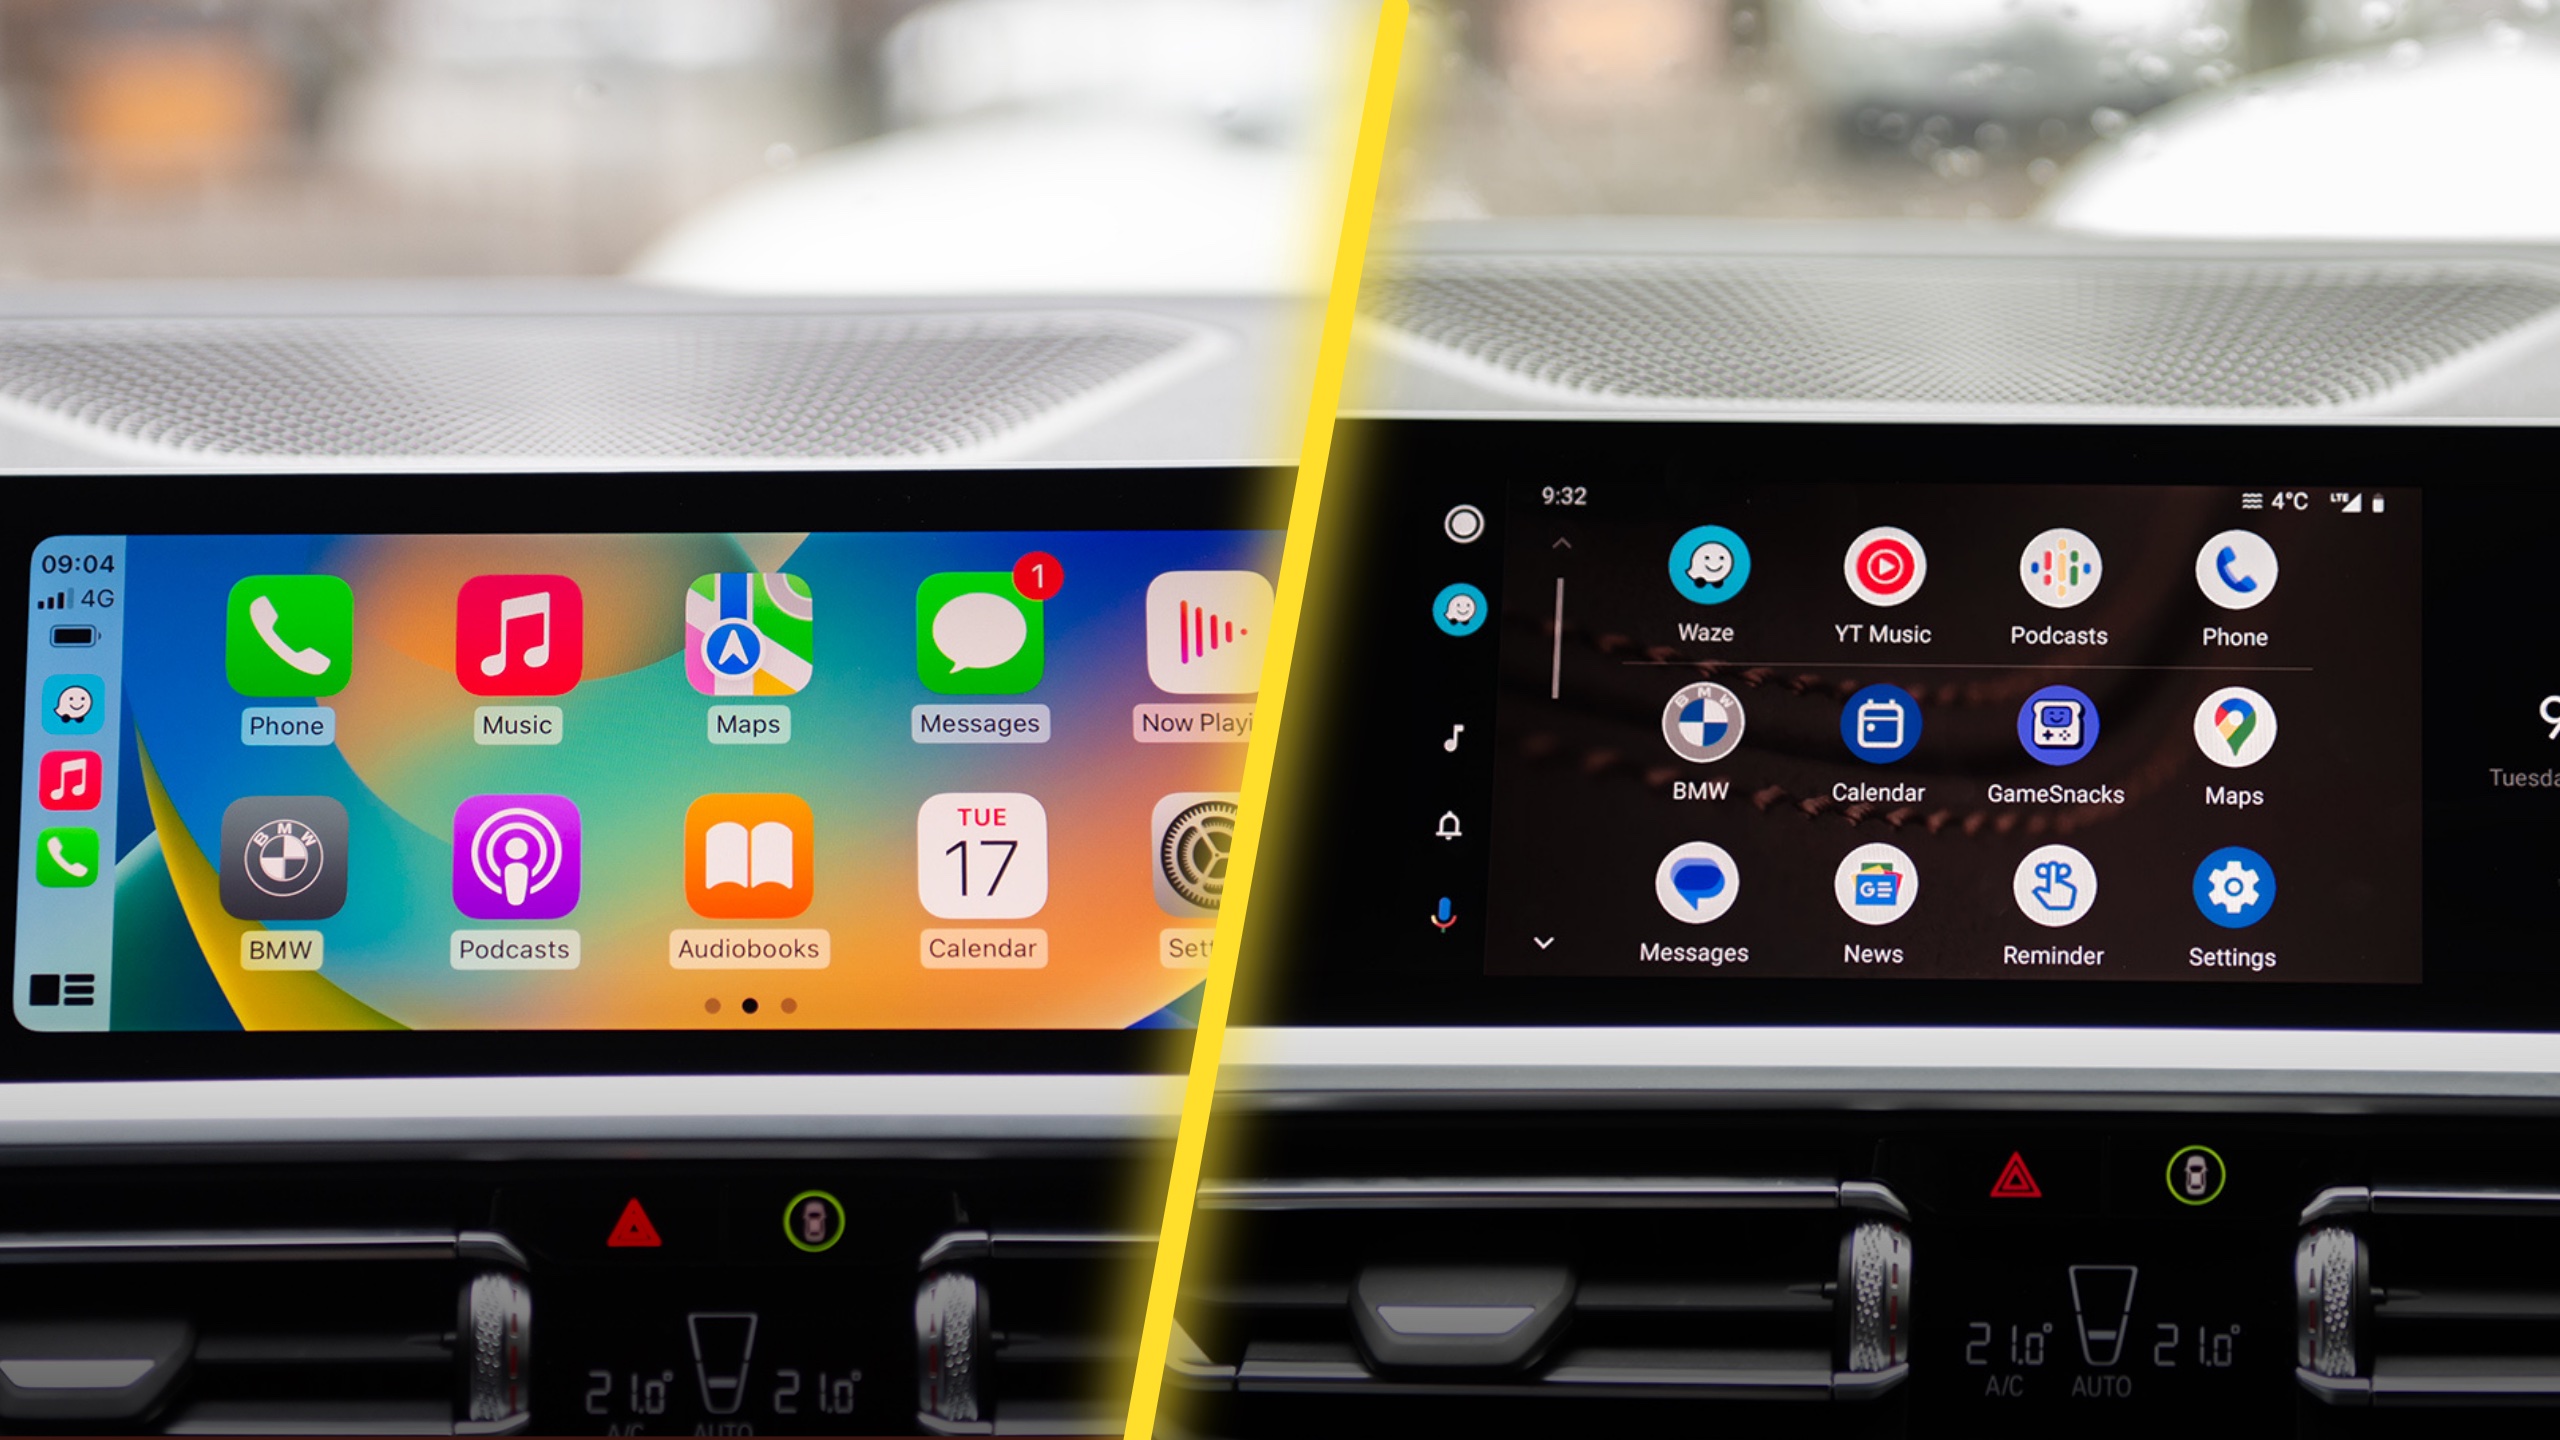 https://s1.cdn.autoevolution.com/images/news/android-auto-and-carplay-the-complete-guide-219416_1.jpg